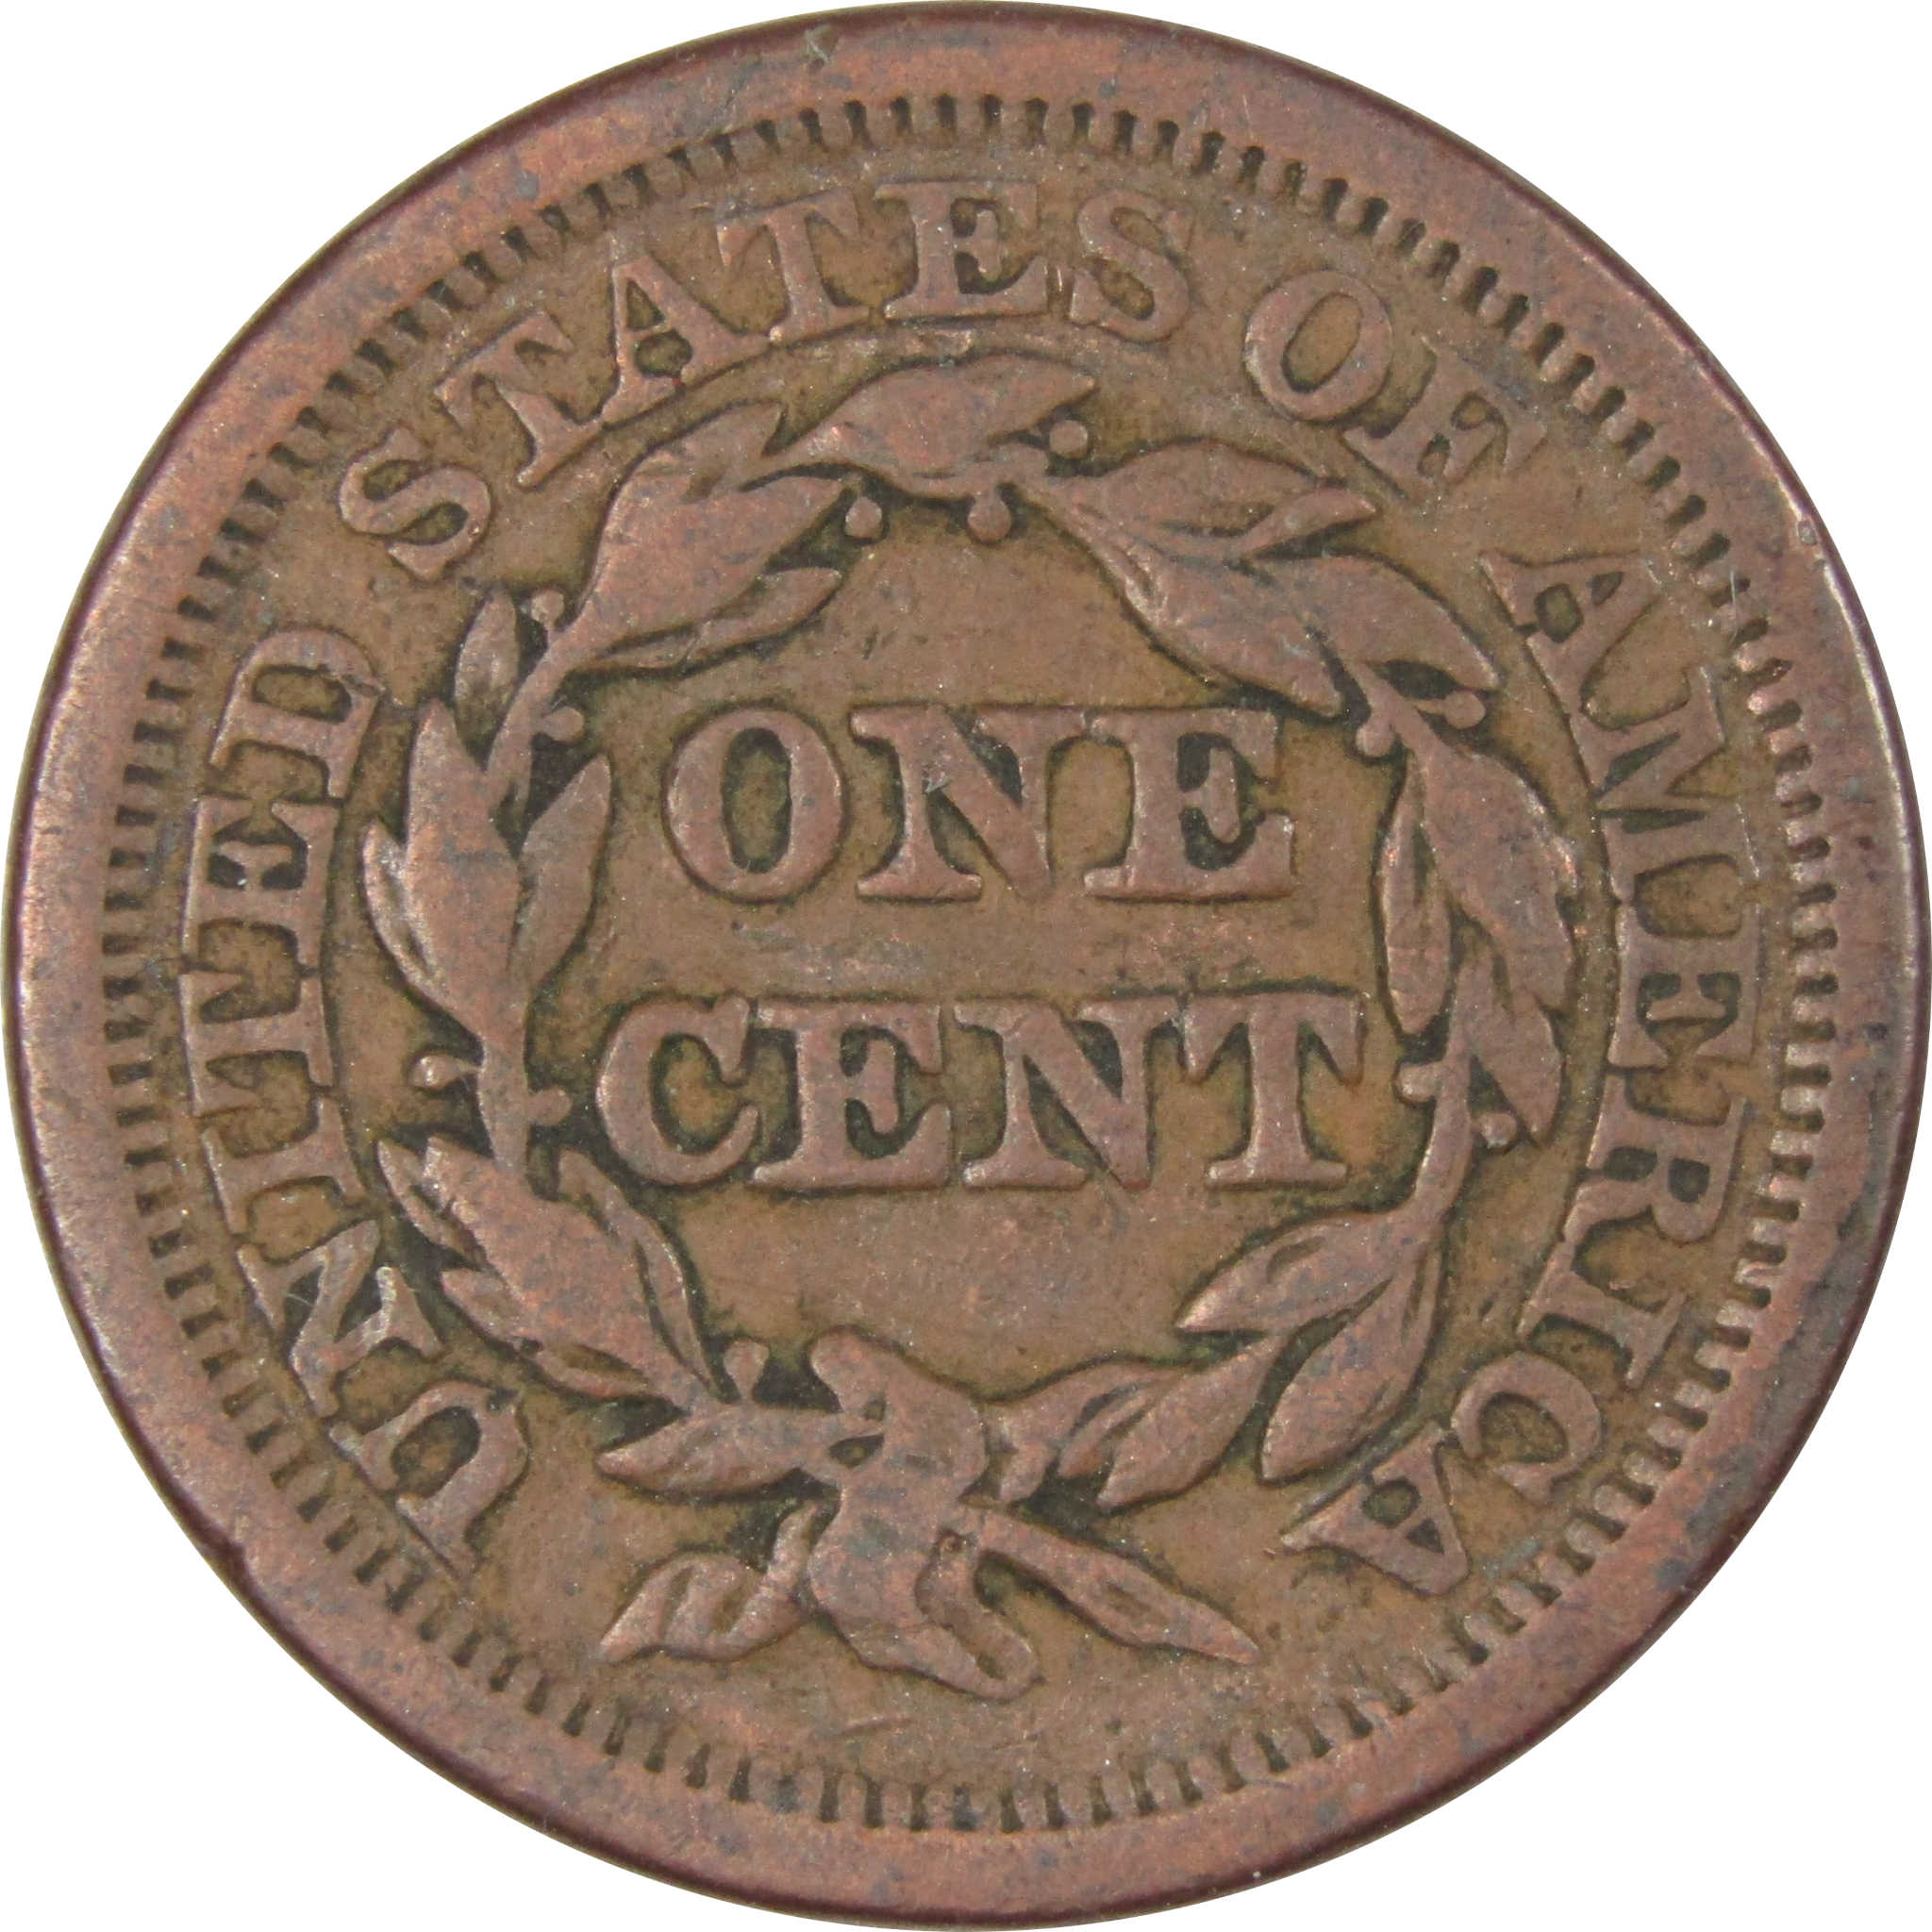 1853 Braided Hair Large Cent VF Very Fine Copper Penny 1c SKU:IPC6633